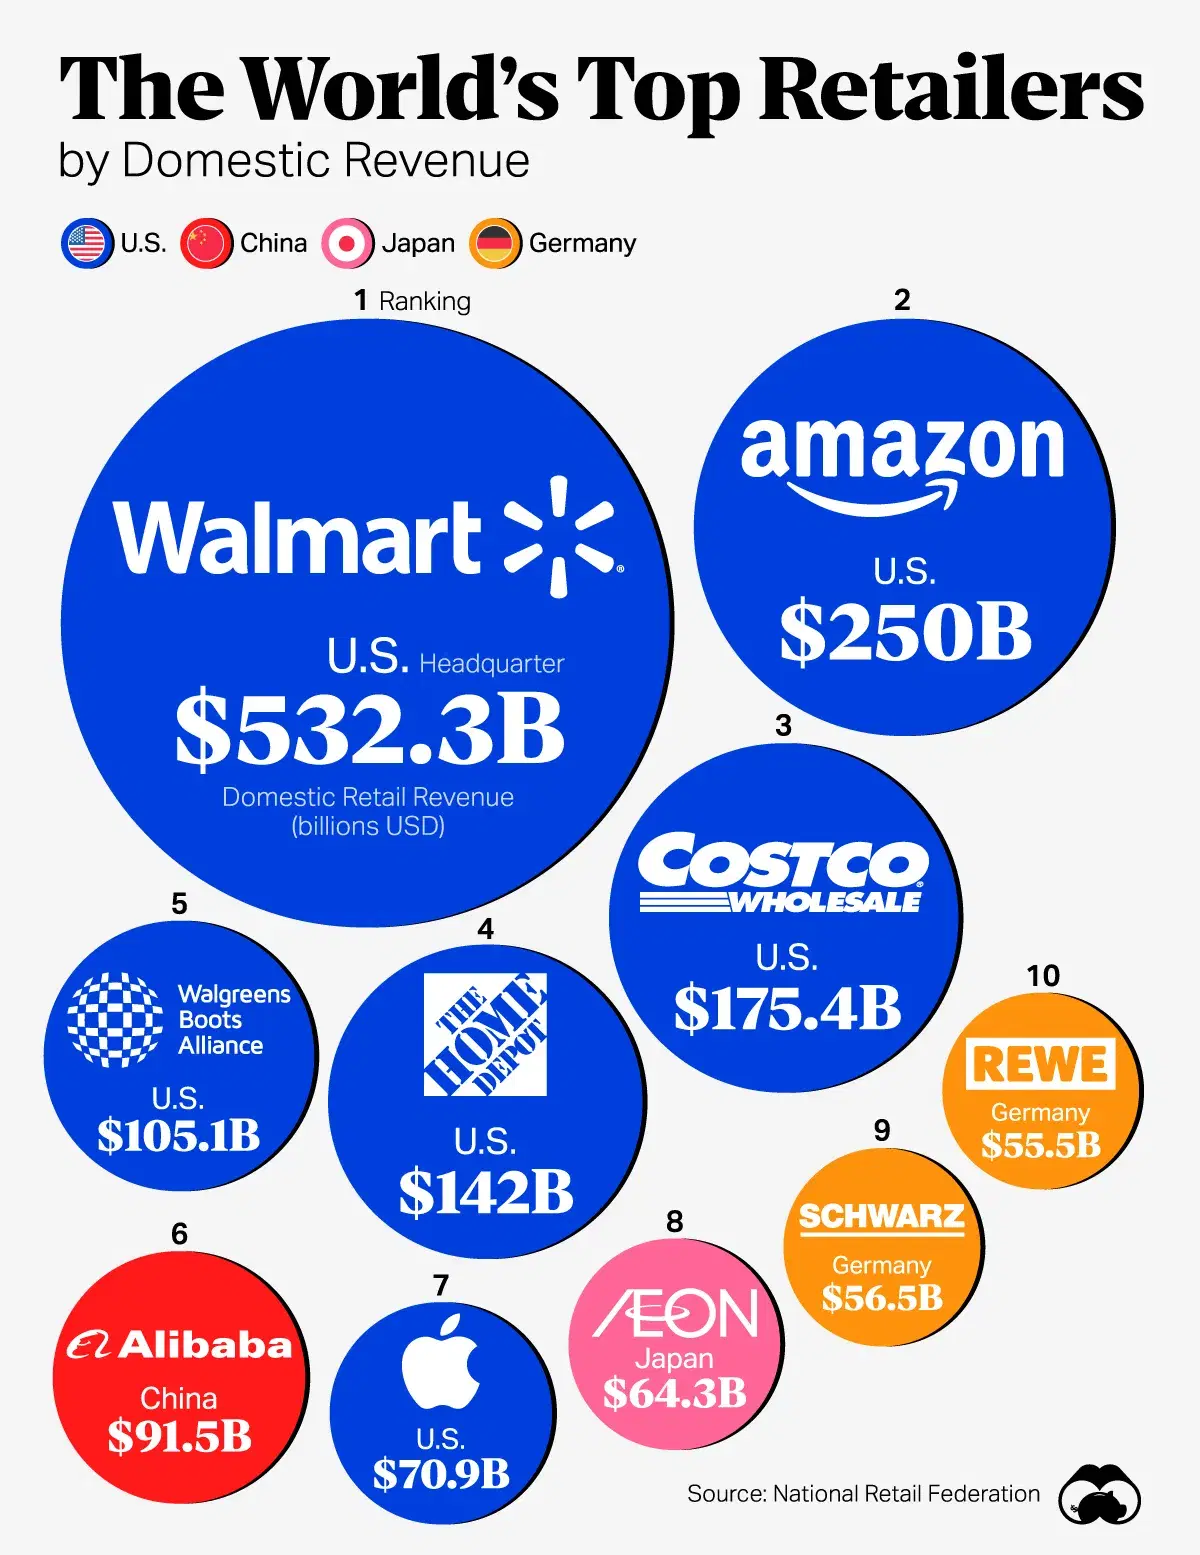 Which Retailers Have the Most Domestic Revenue?